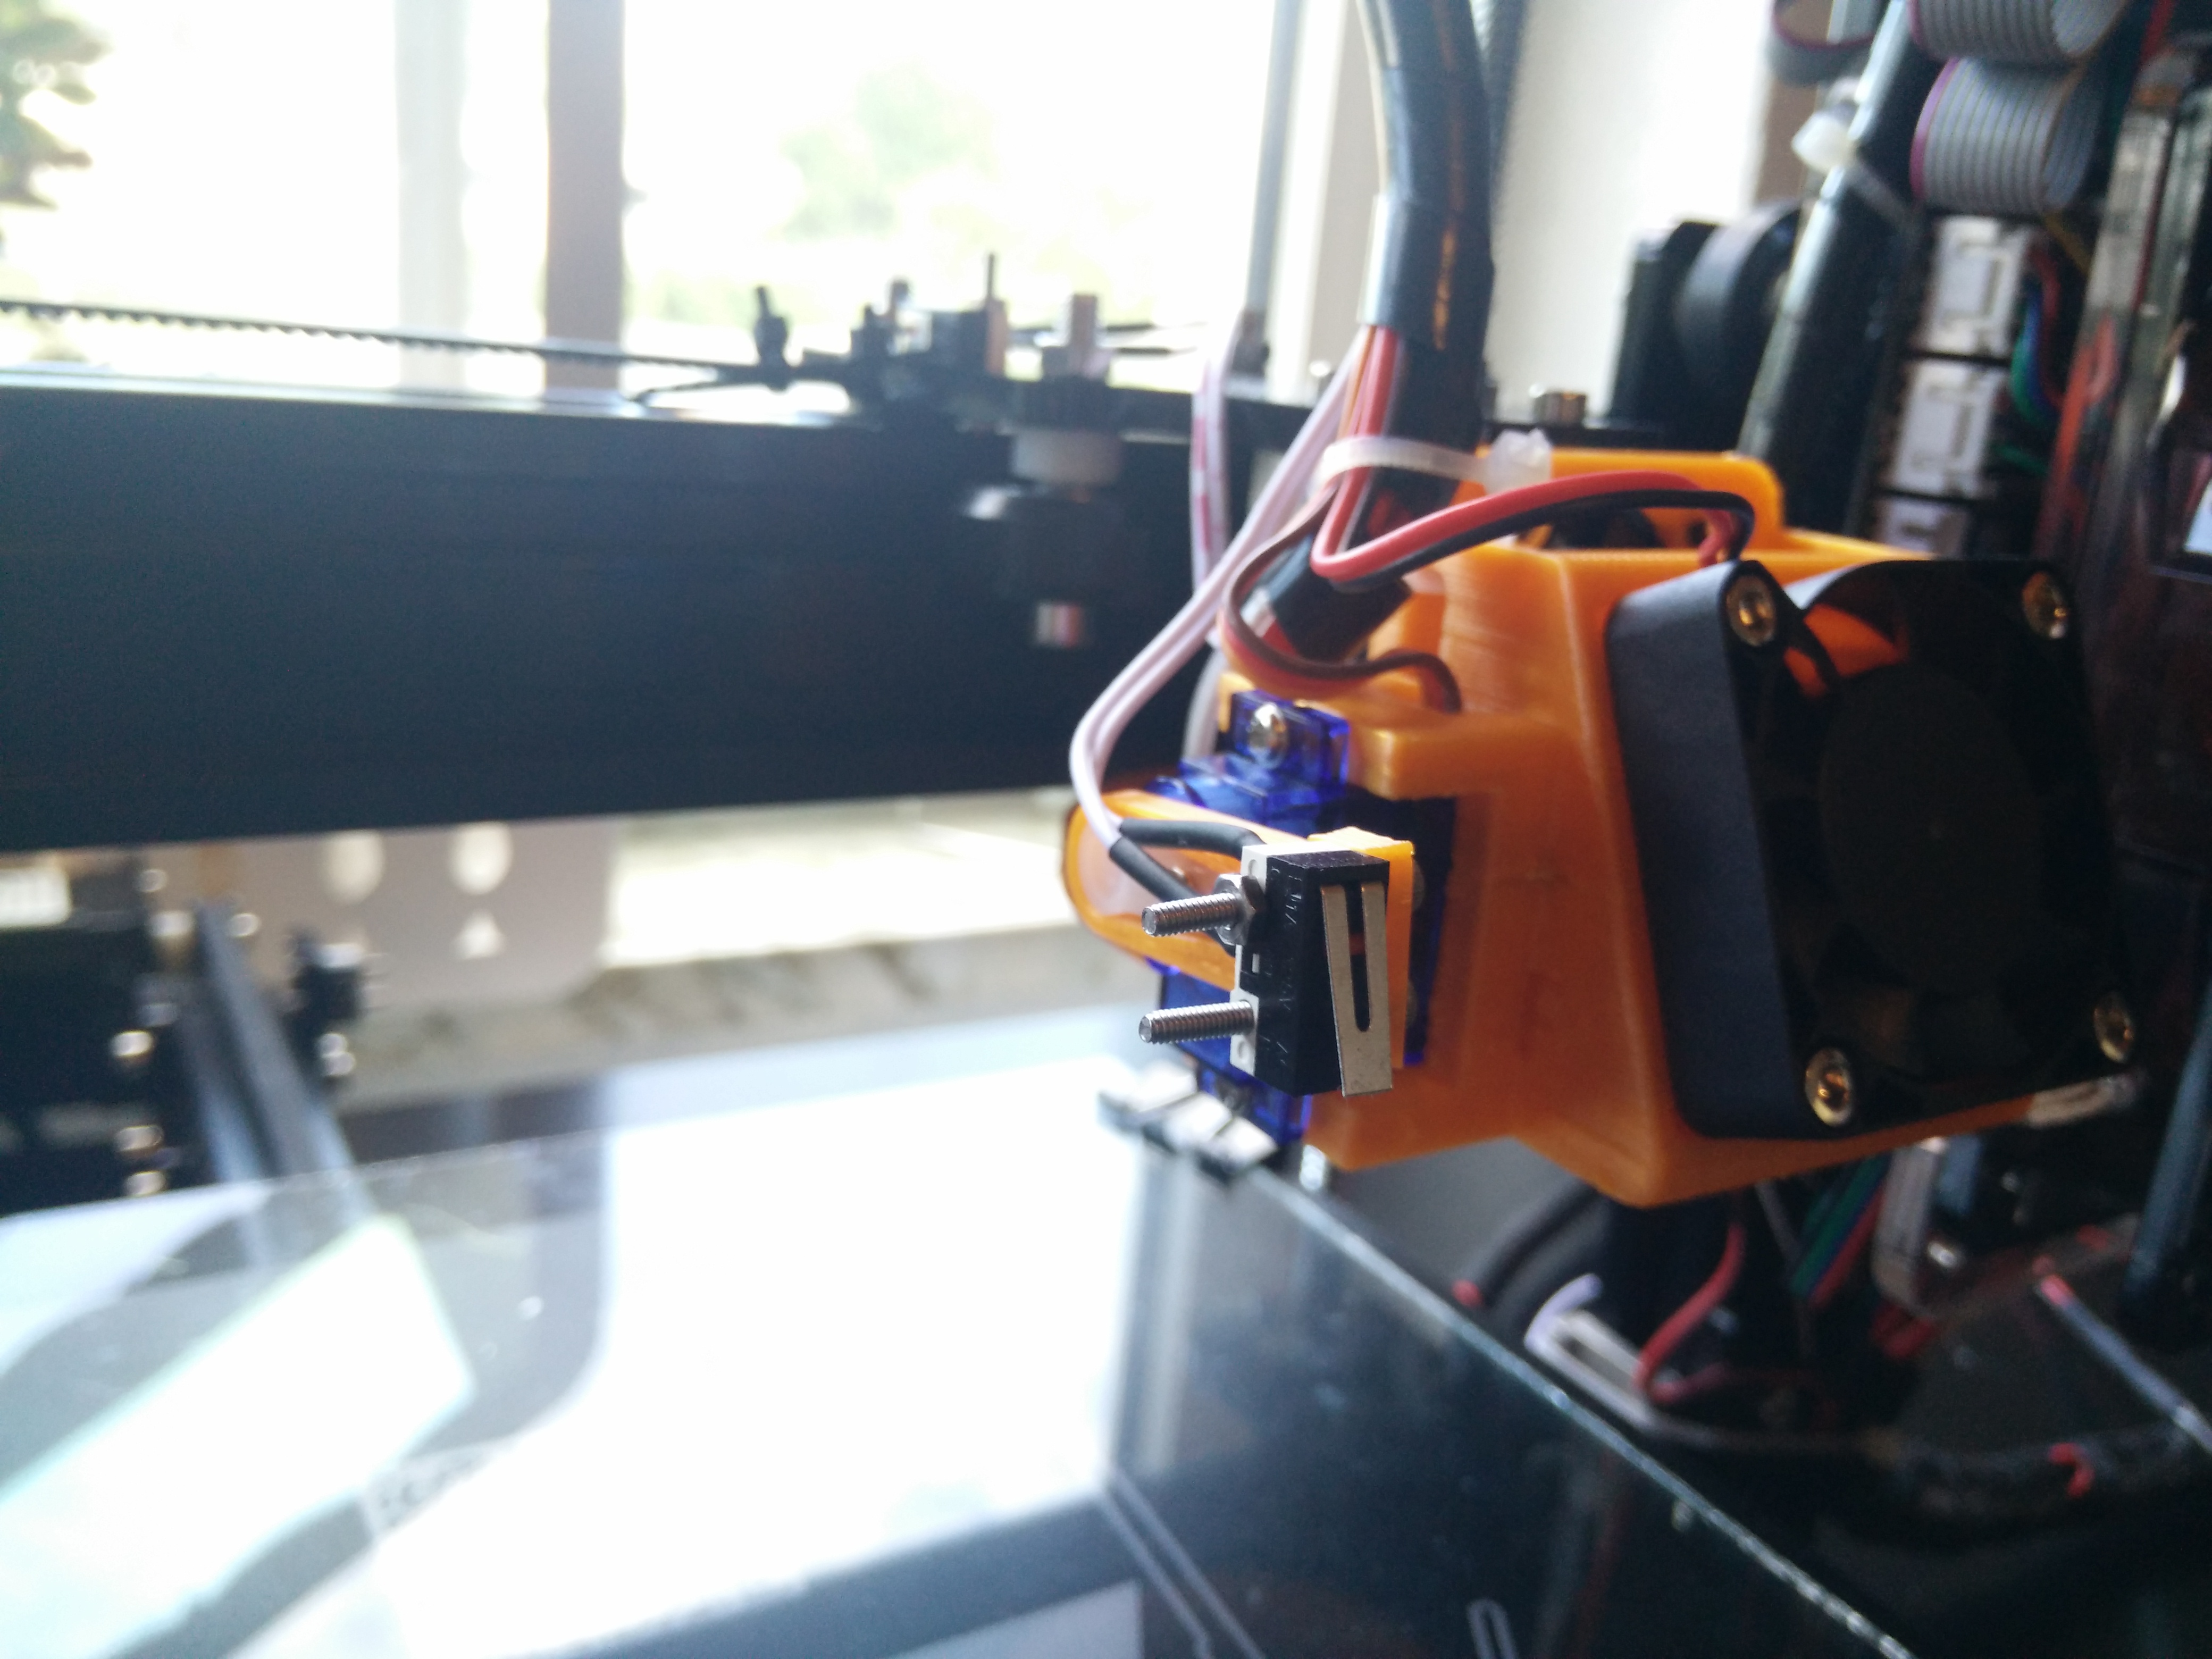 Auto Bed Leveling with SG90 Servo for Tevo Tarantula (or every other 3D printer)